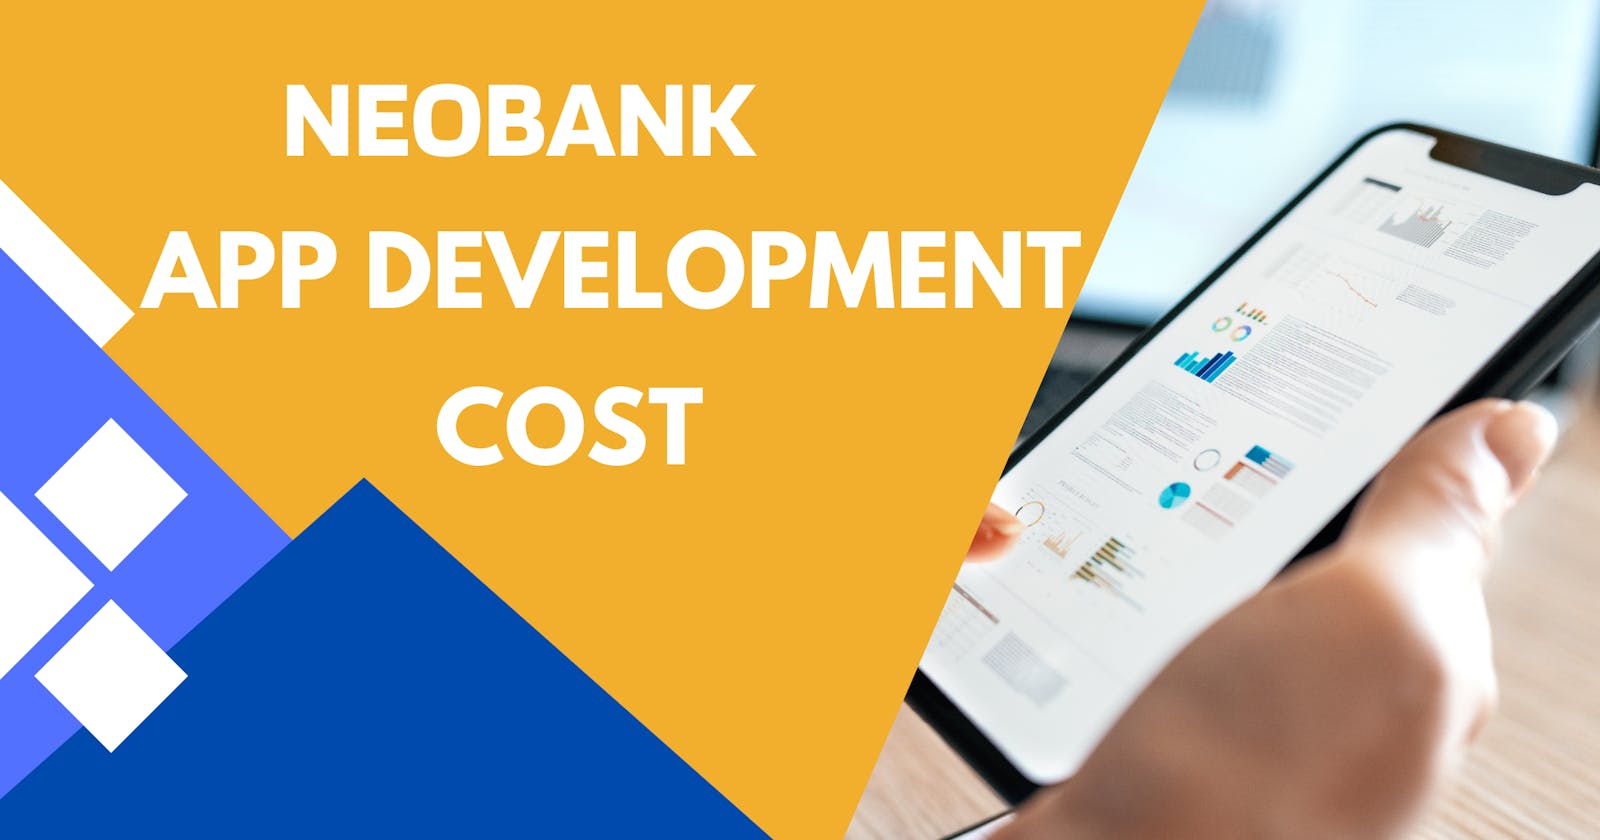 How Much Does It Cost to Build a Neobank App?